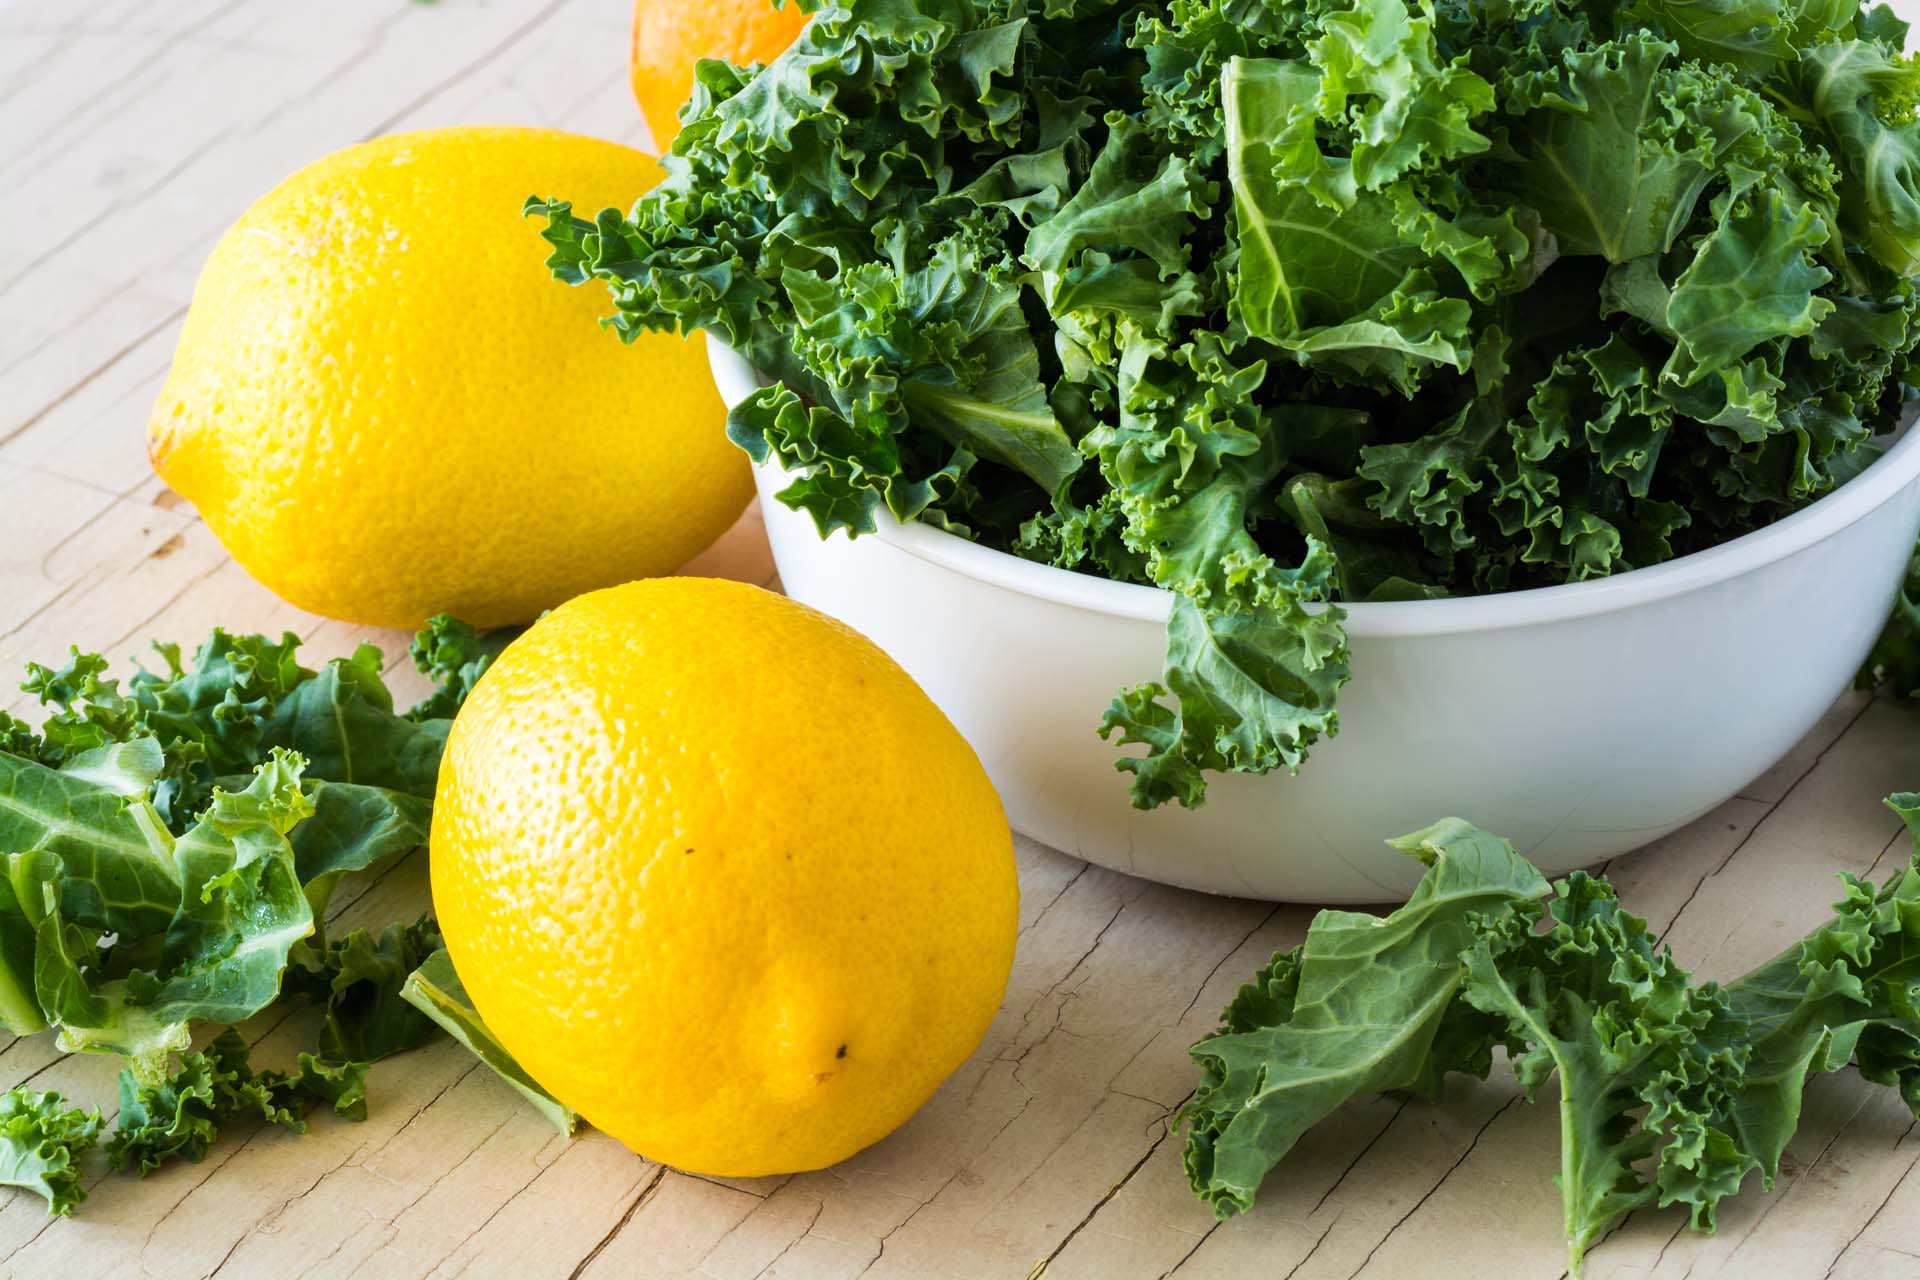 A bowl of kale with some lemons next to it